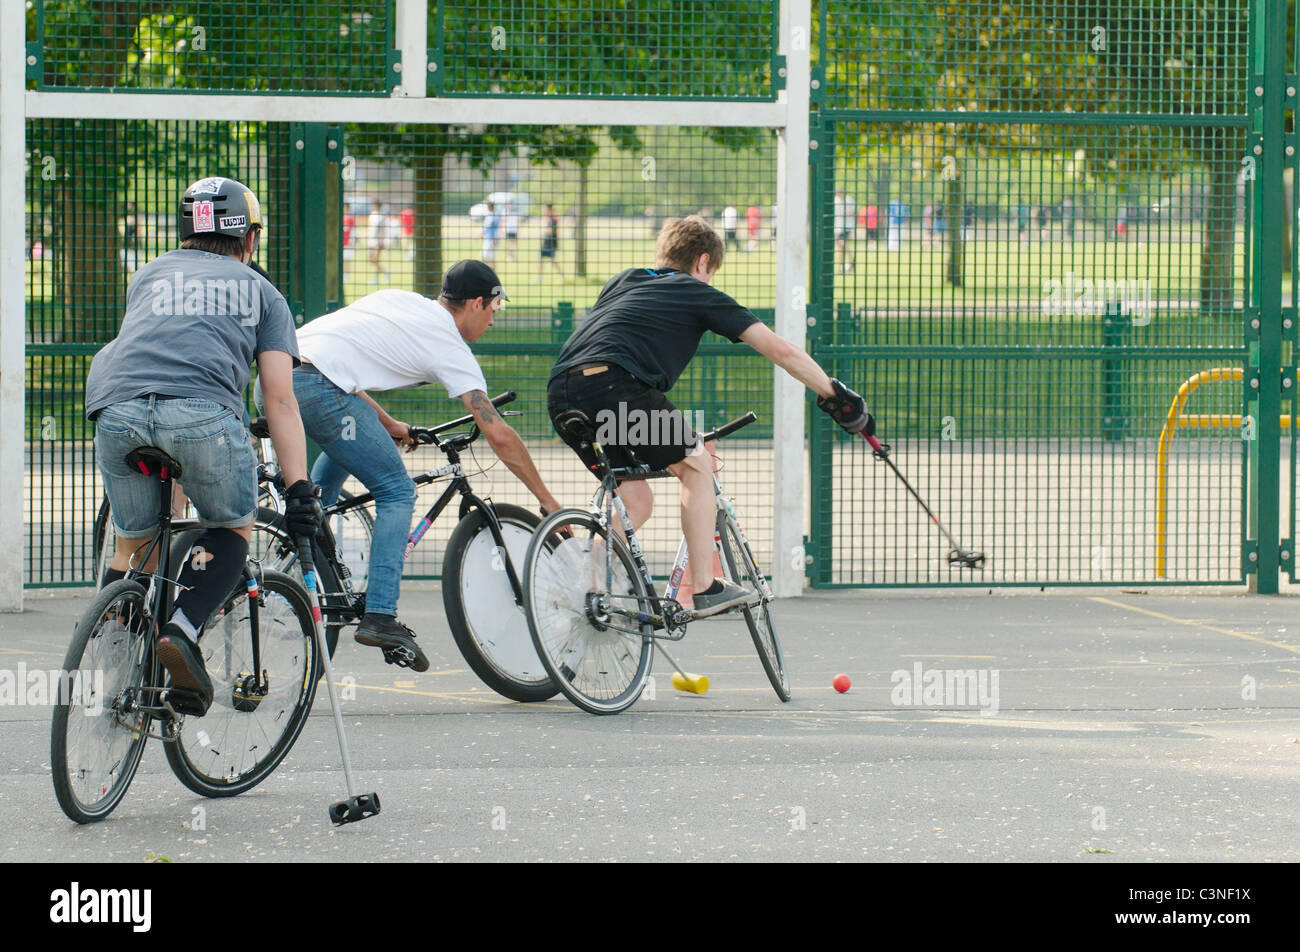 Bicycle Polo in a park in Brighton, England Stock Photo